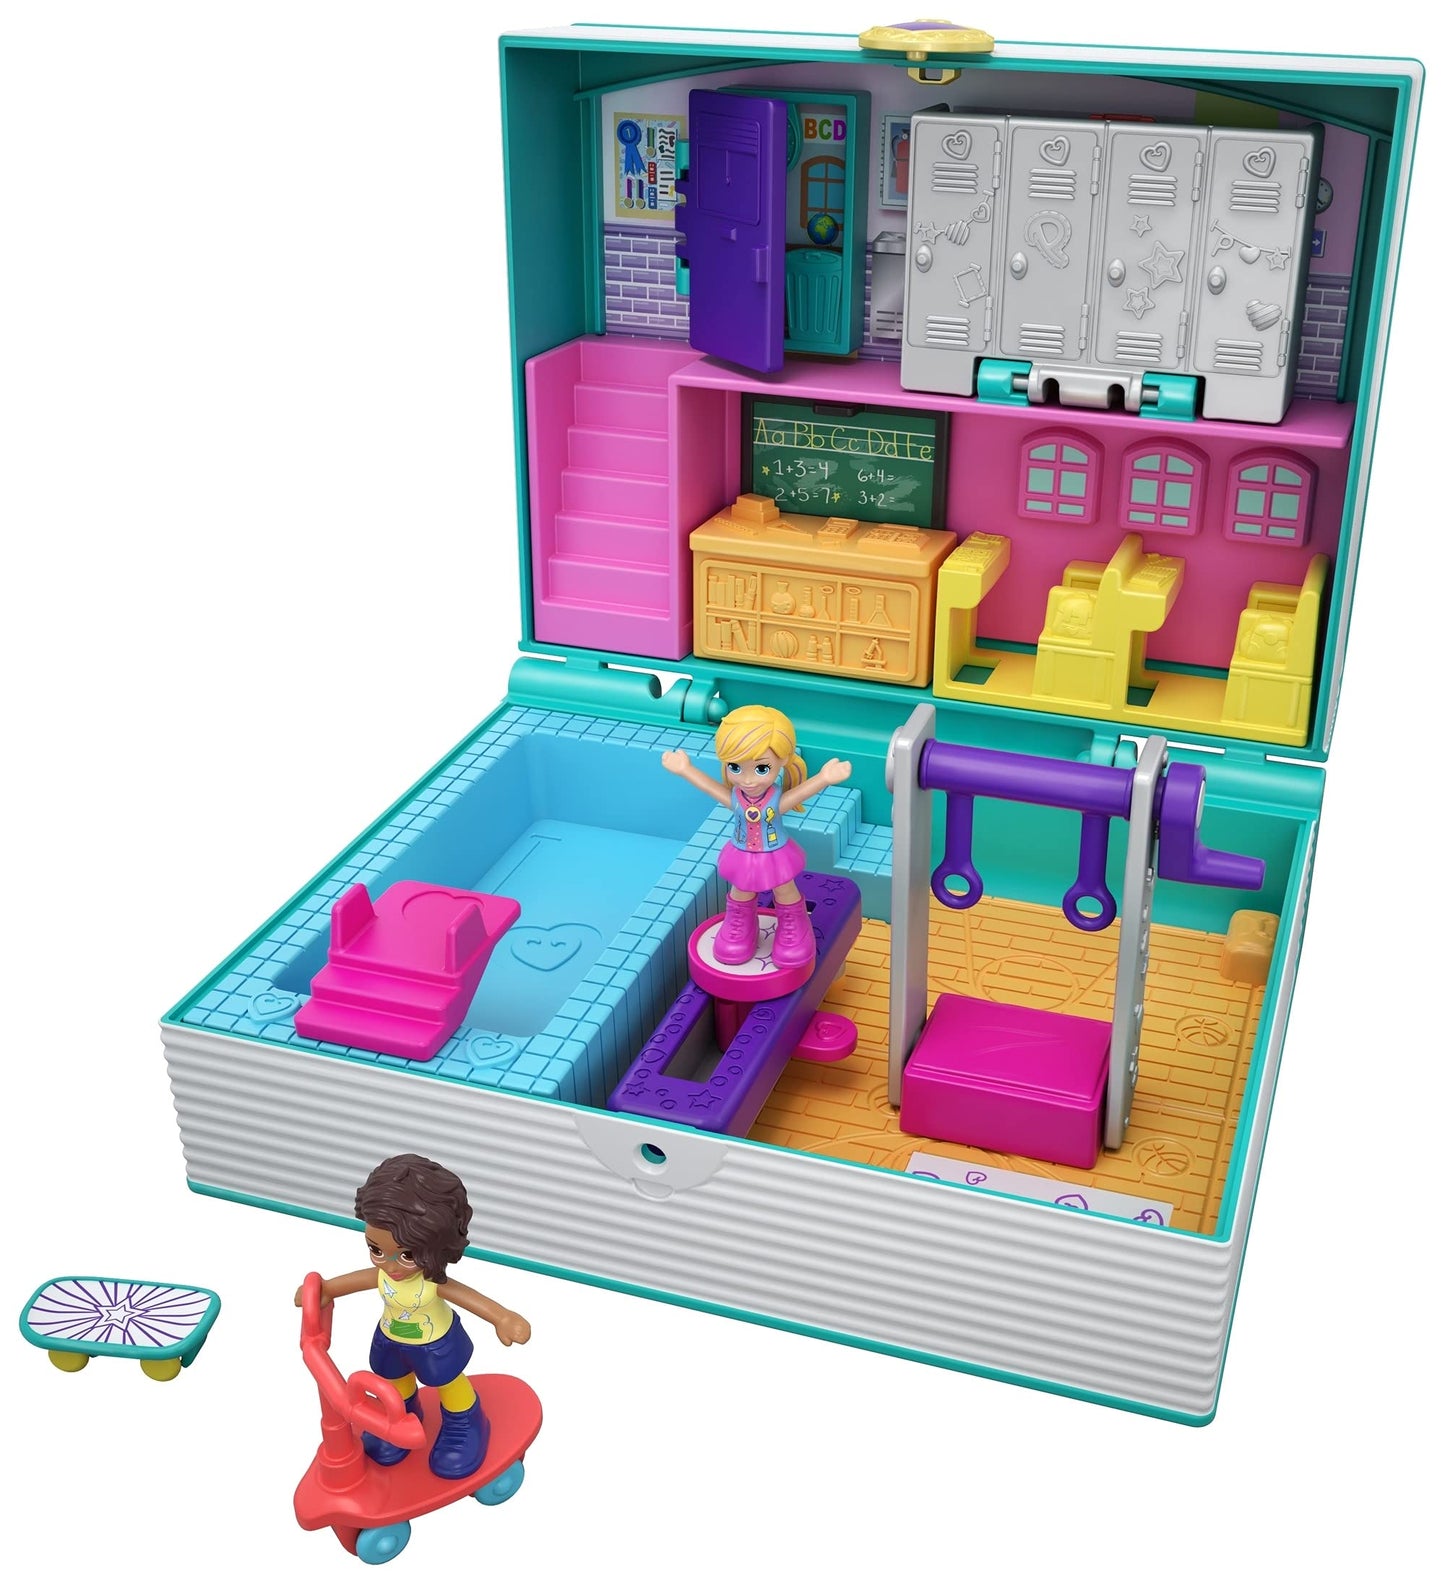 Polly Pocket Pocket World Mini Middle School Compact